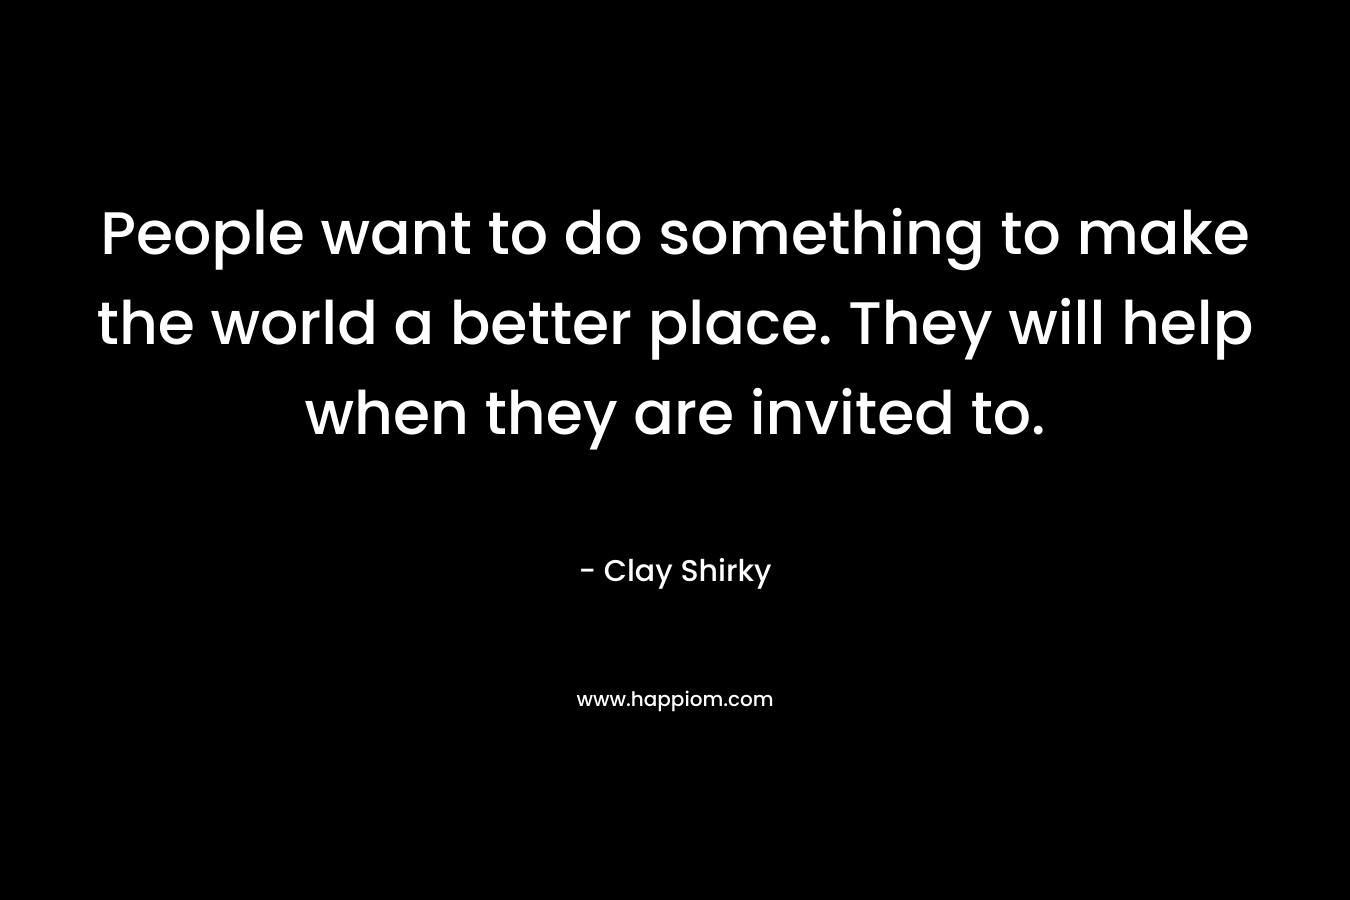 People want to do something to make the world a better place. They will help when they are invited to. – Clay Shirky